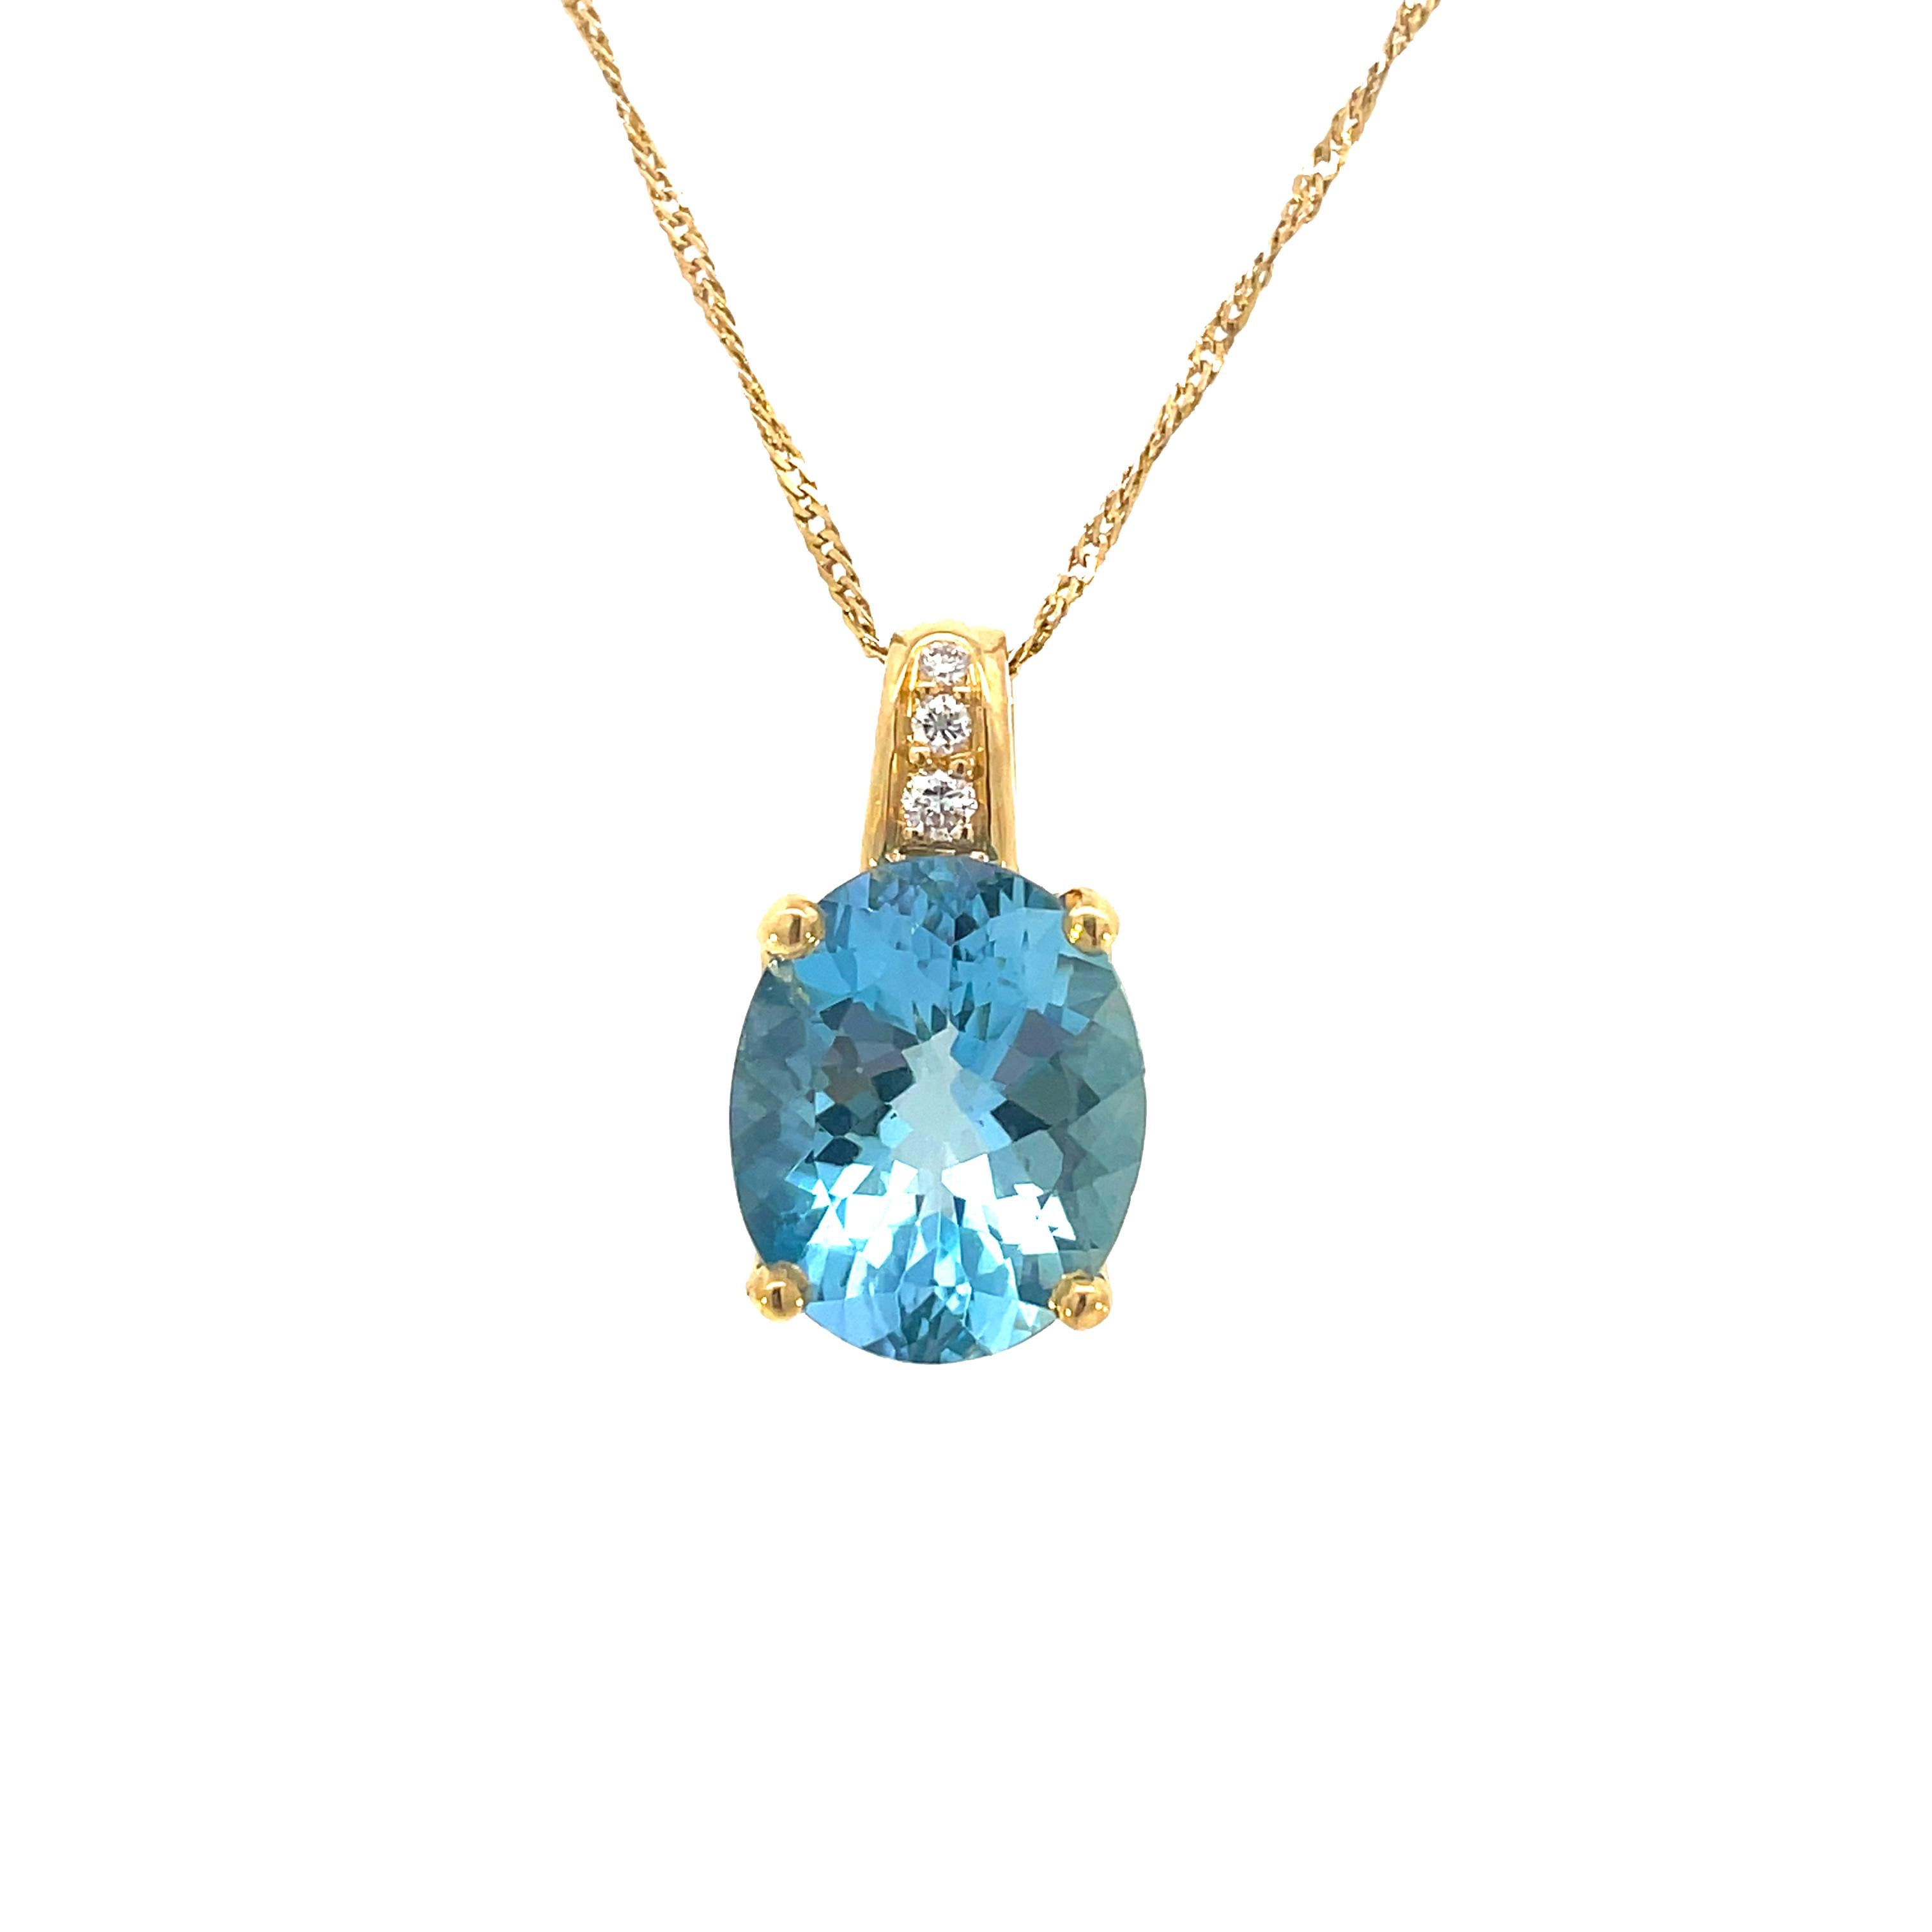 This is an elegant H. Stern necklace crafted in 18K yellow gold and showcases a breathtaking oval Aquamarine pendant with three sparkling diamonds! A bright and beautiful blue oval-shaped aquamarine, weighing 4.50 carats, beams brilliantly from